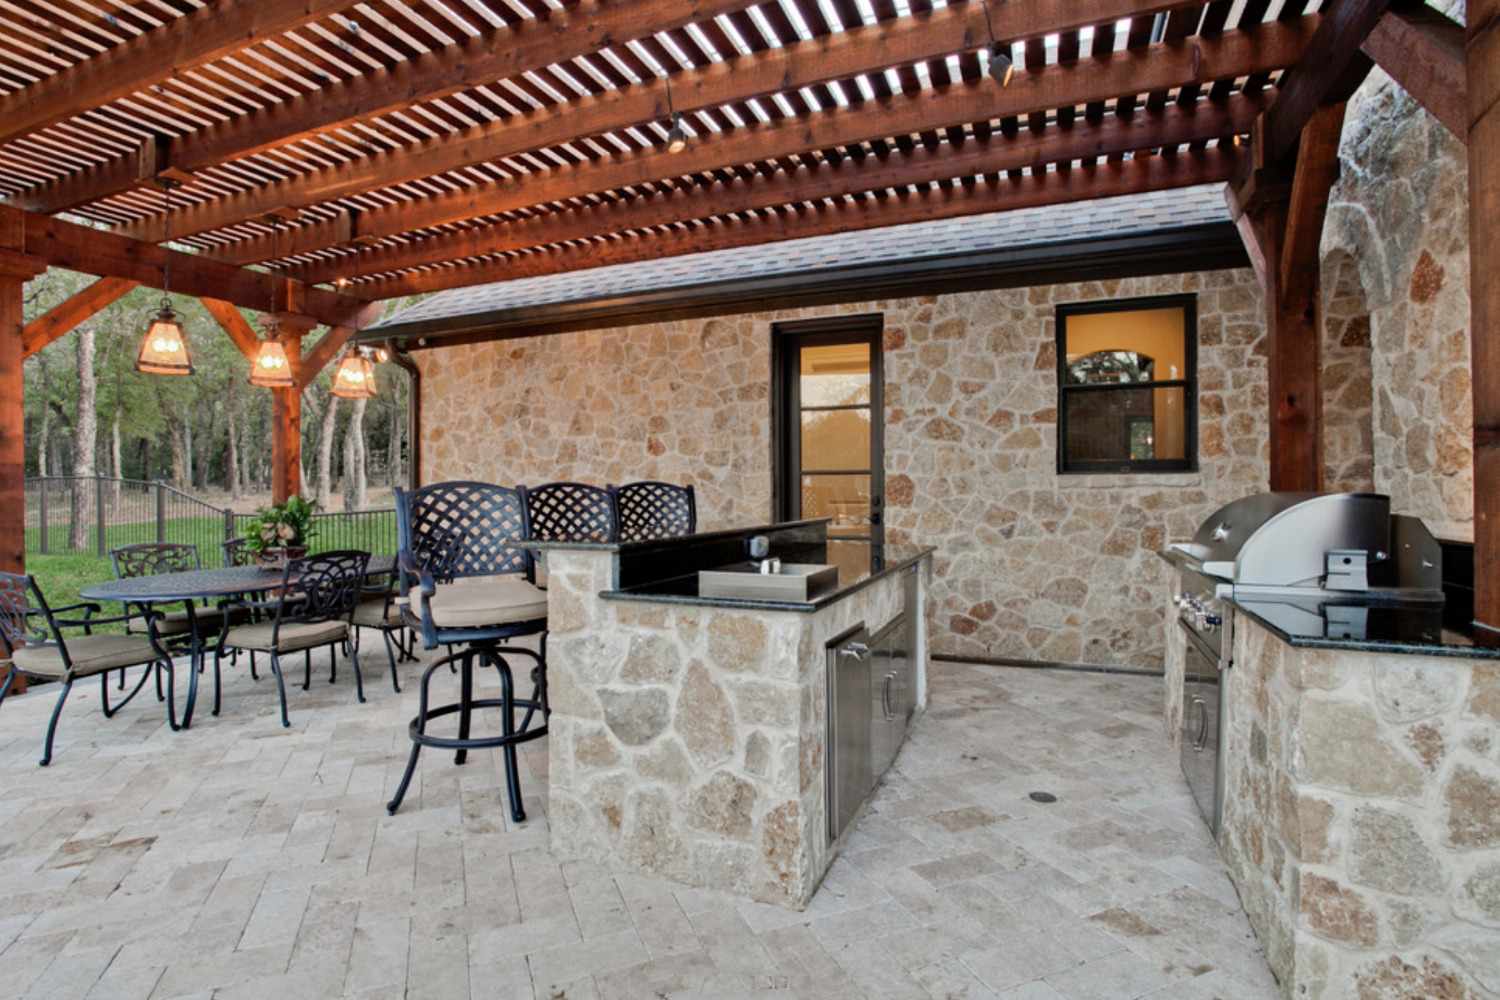 CREATE YOUR DREAM OUTDOOR KITCHEN THIS SUMMER- Tom Len Custom Homes